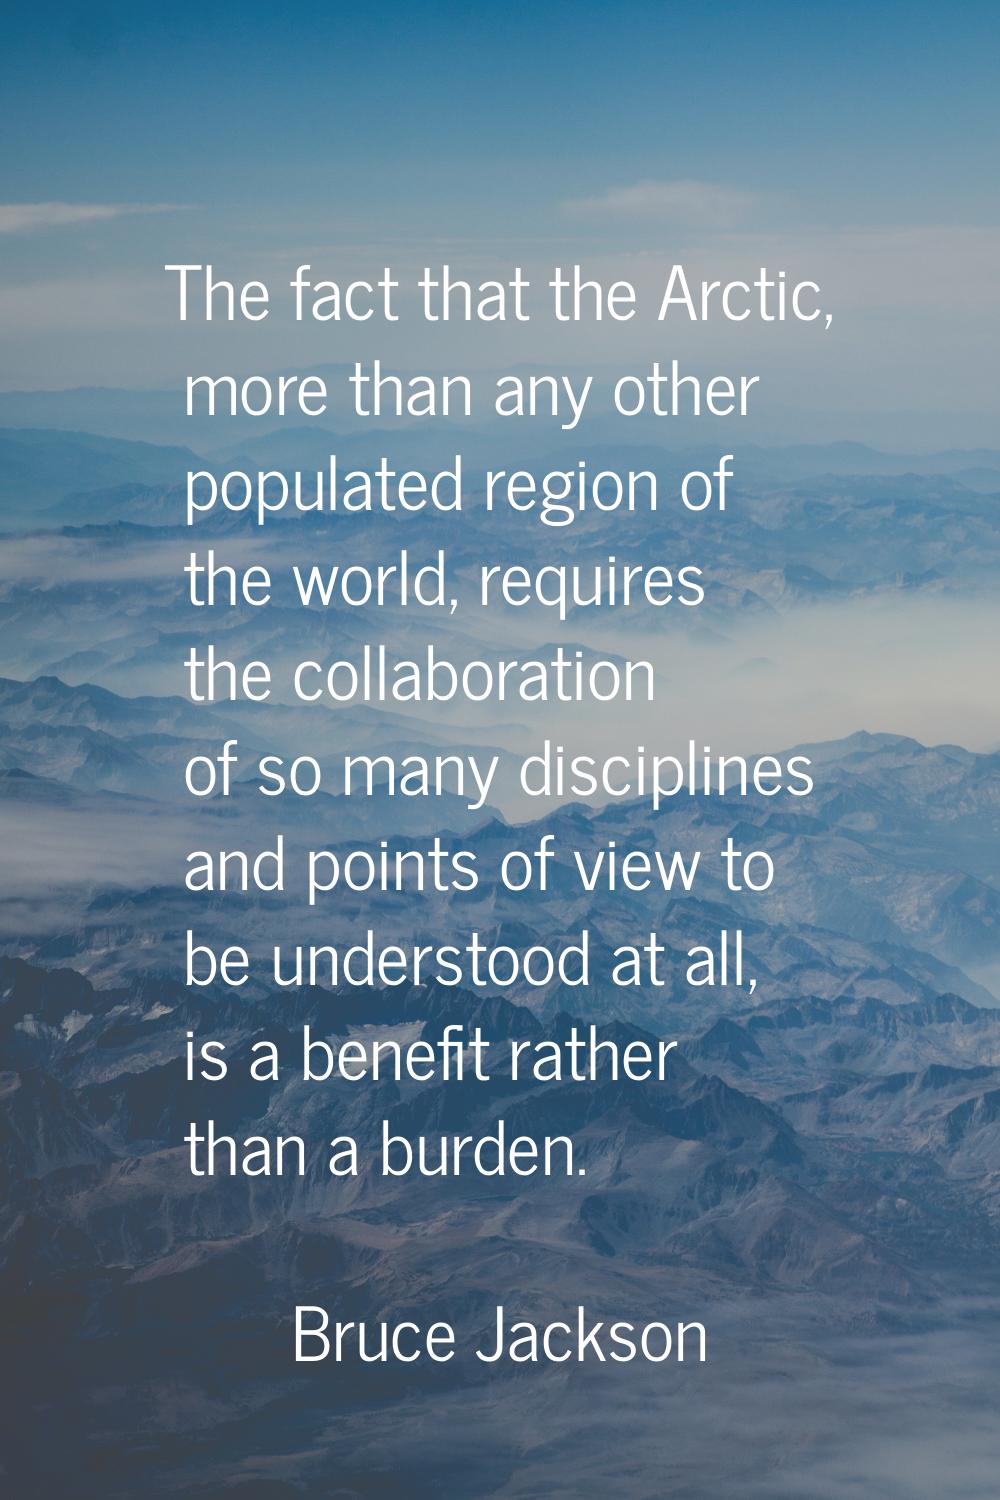 The fact that the Arctic, more than any other populated region of the world, requires the collabora